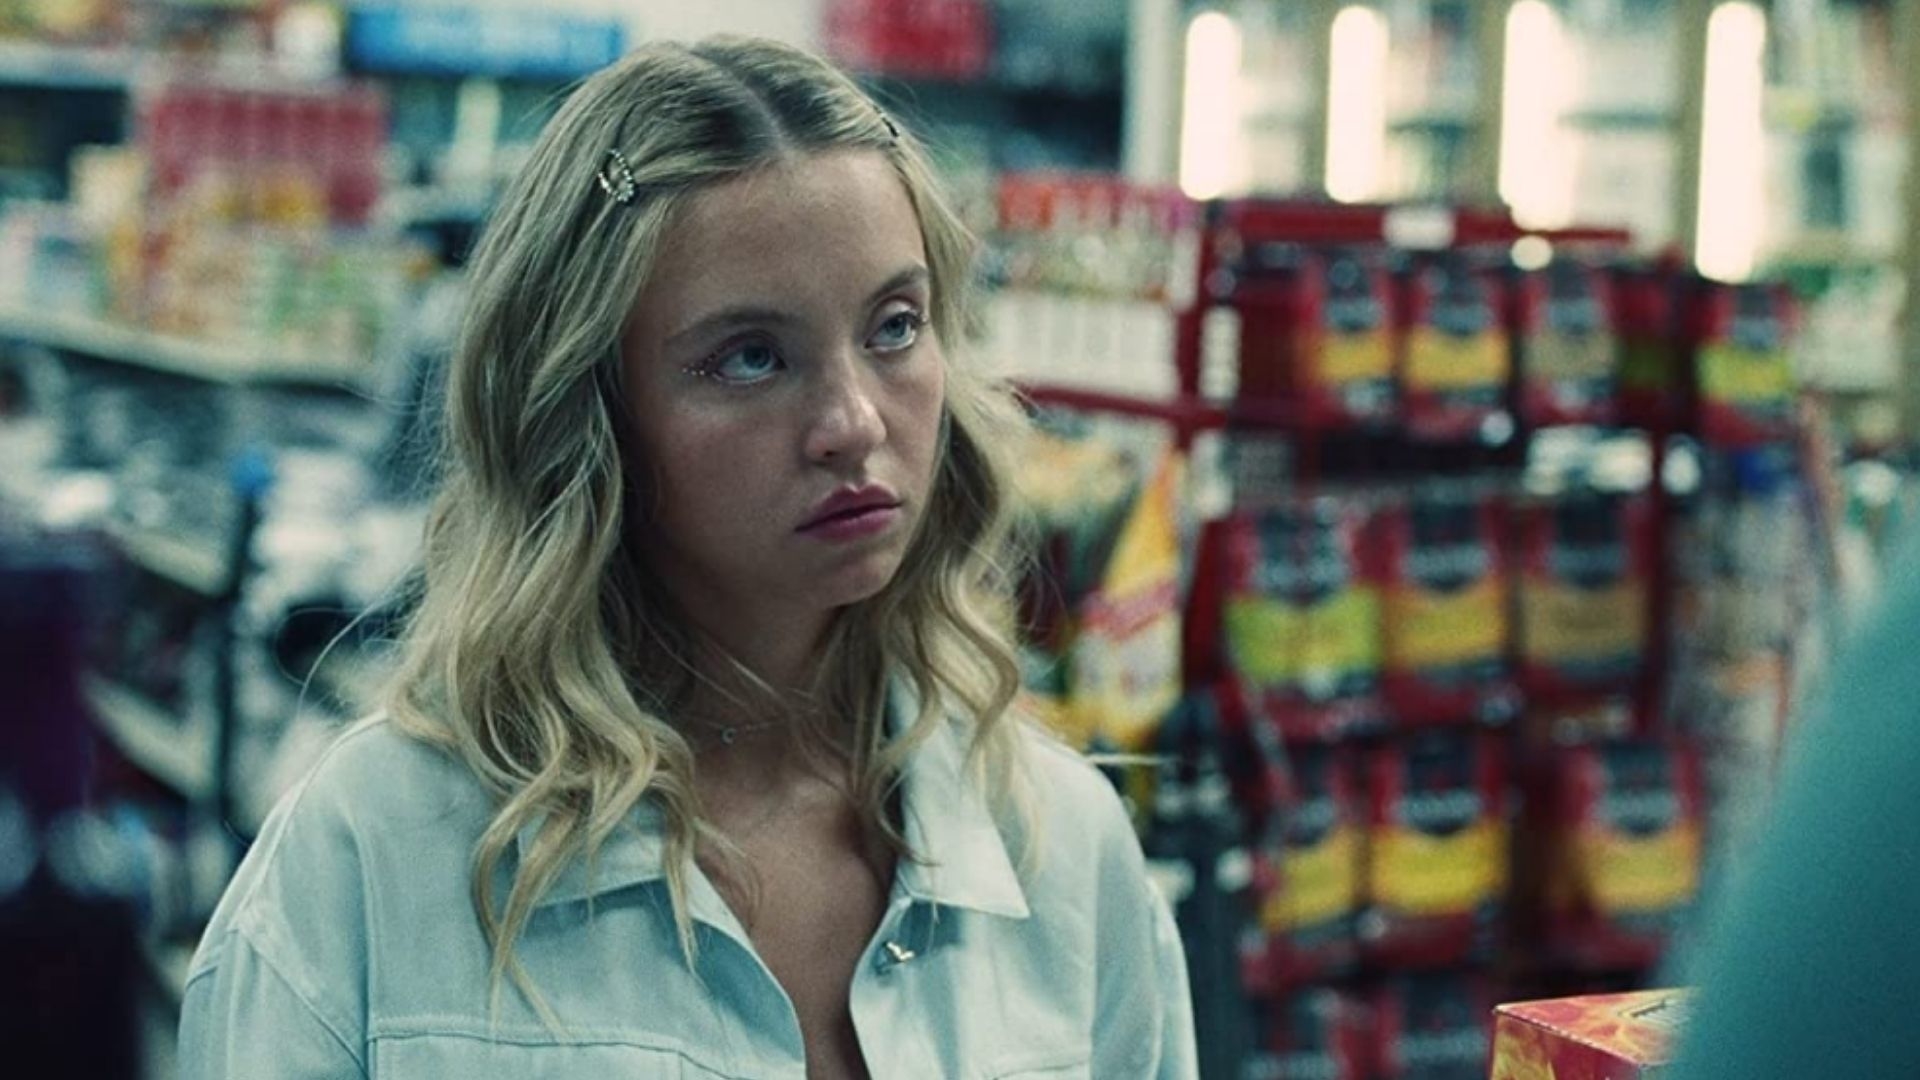 Woman portrayed by Sydney Sweeney looks pensive in a grocery store aisle